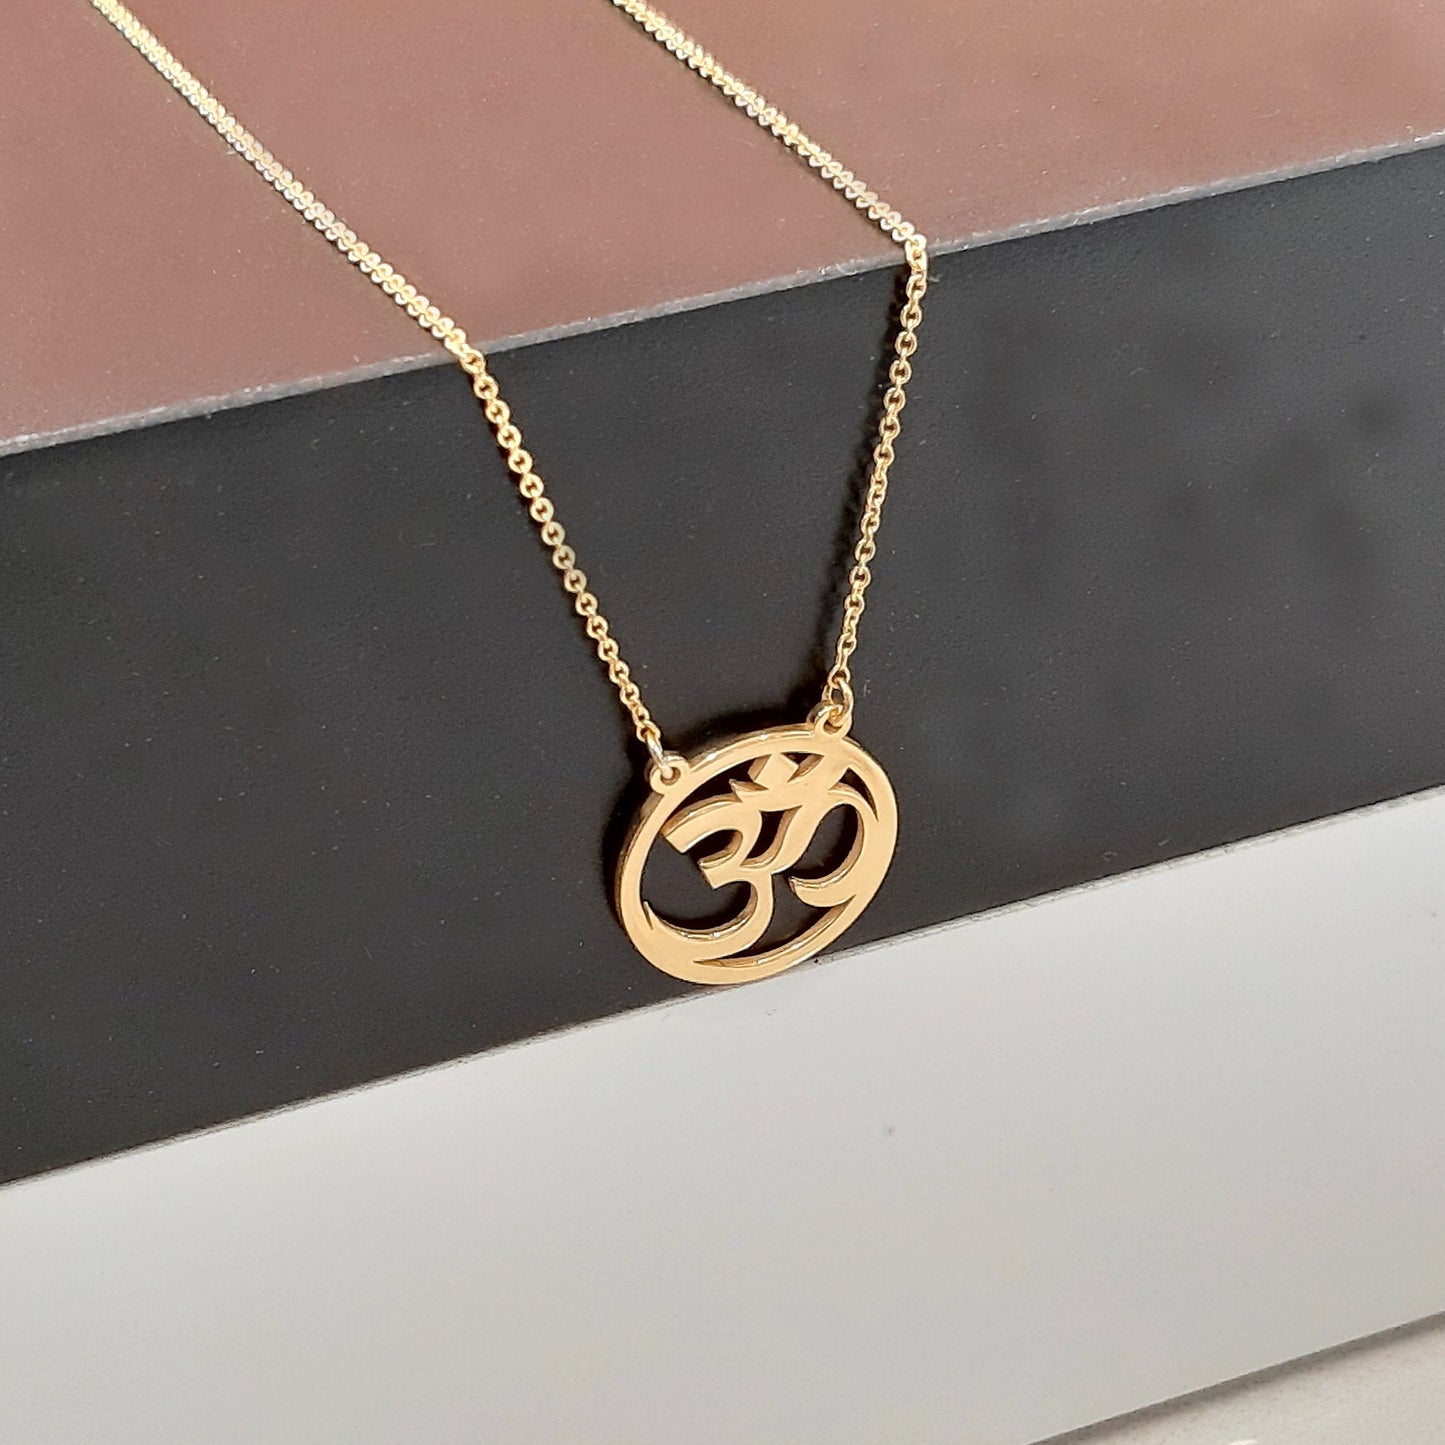 14K Solid gold Om necklace, Yoga jewelry